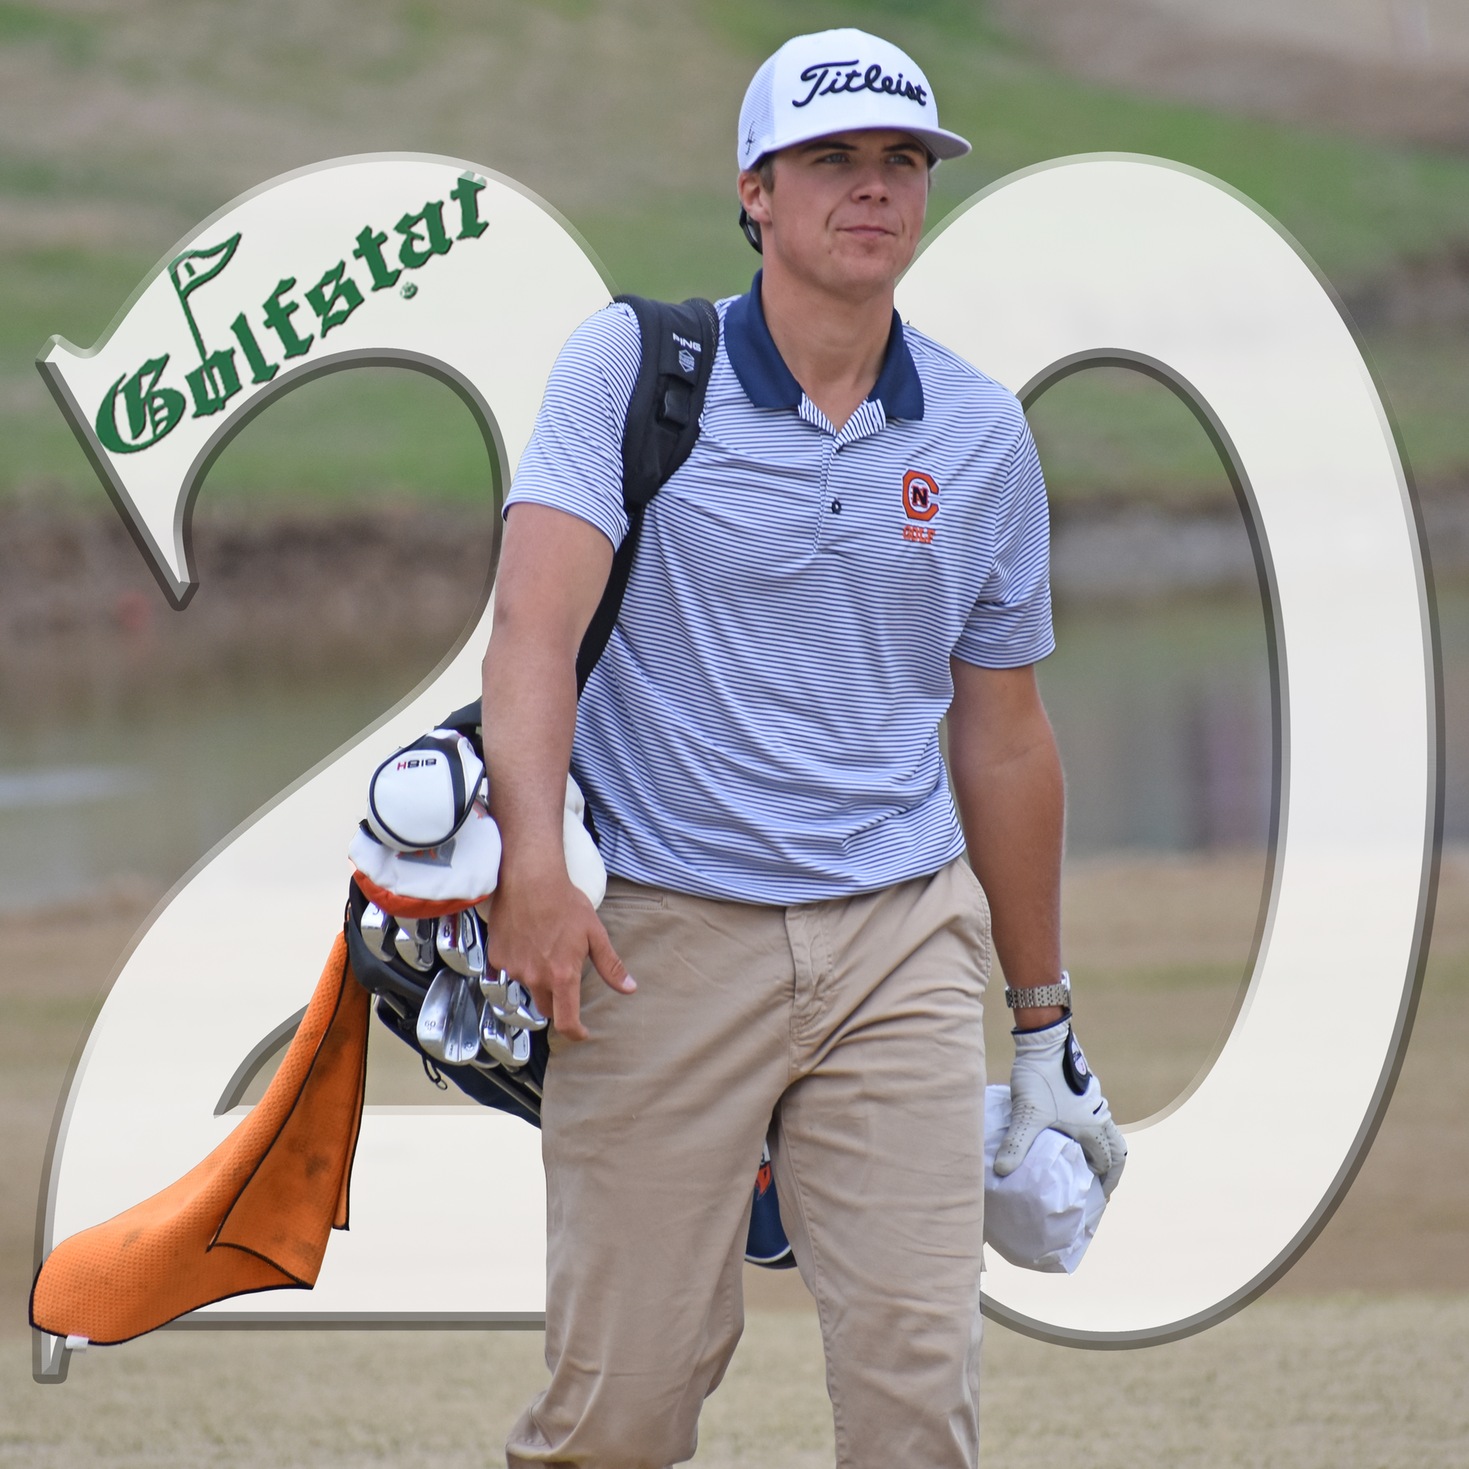 Golfstat ranks Eagles as #20 in the nation